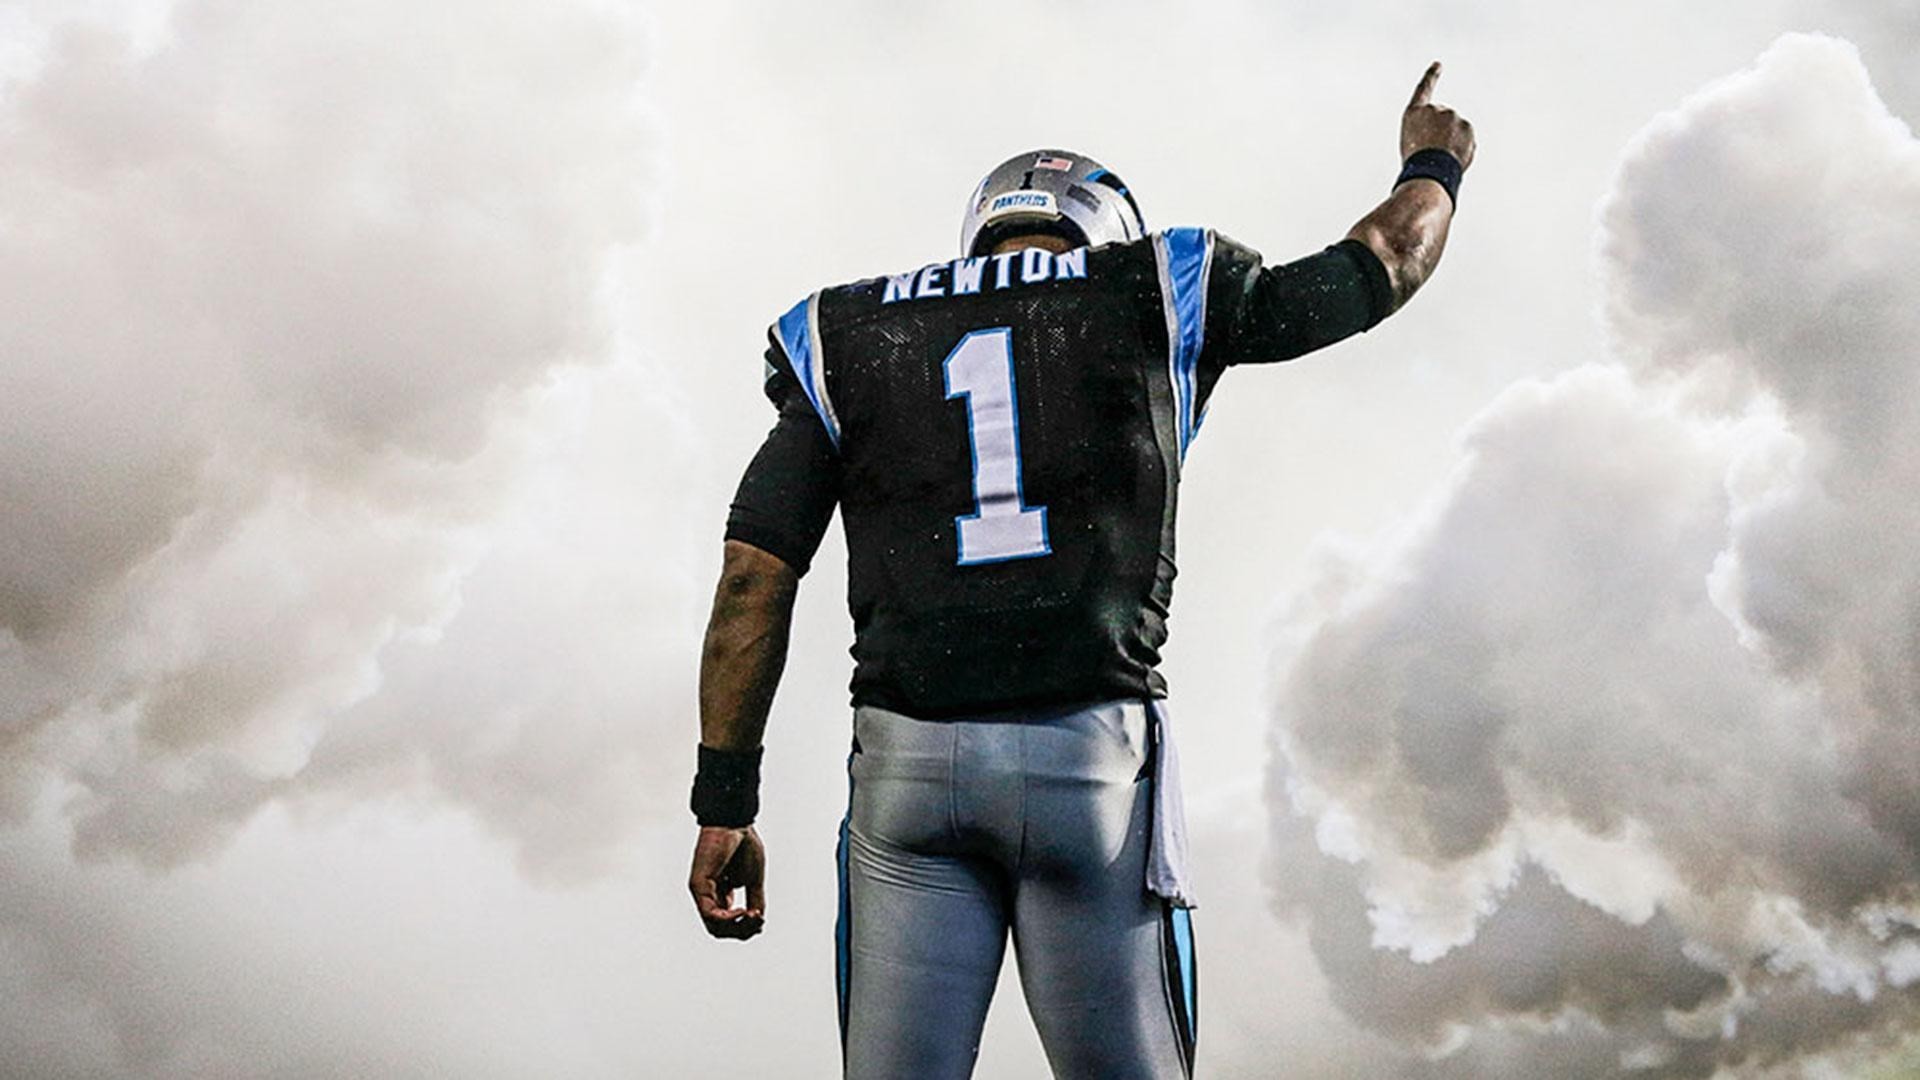 px Free Awesome cam newton wallpaper by Hearn Nail for : PKF